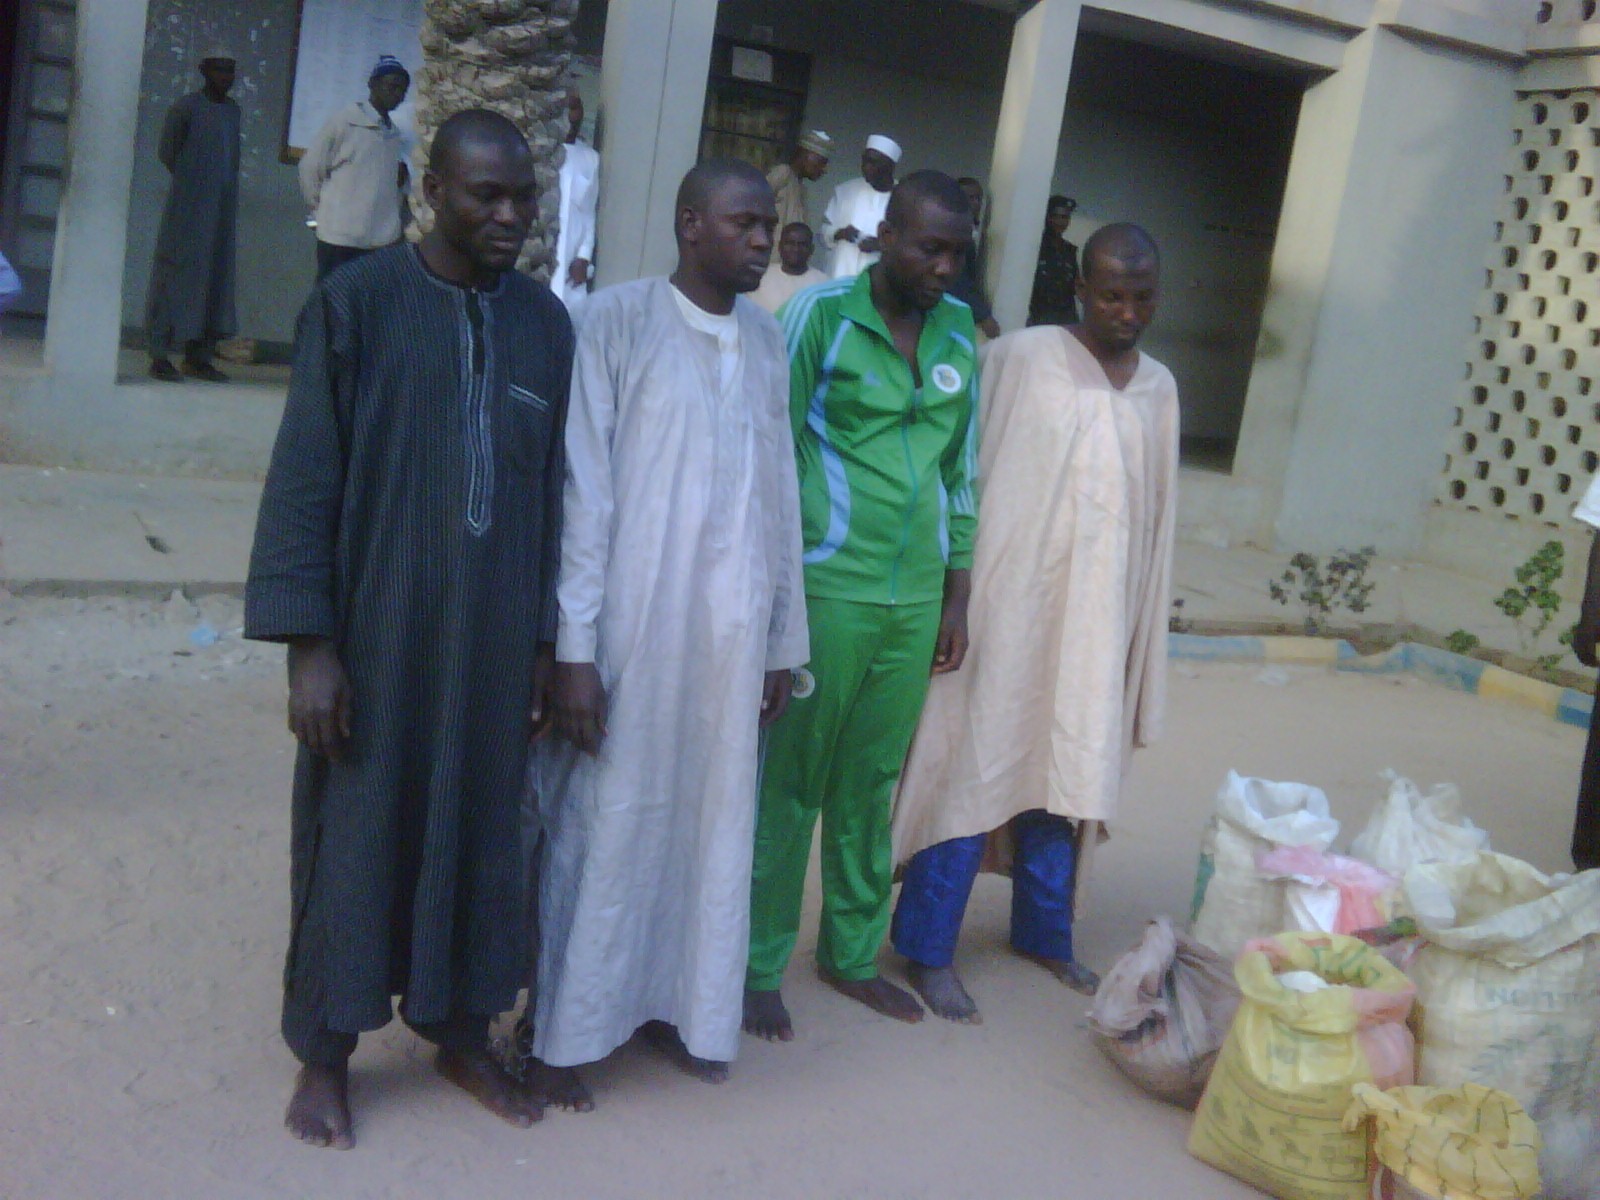 Four suspected Boko Haram members with explosives arrested by police in Kano today